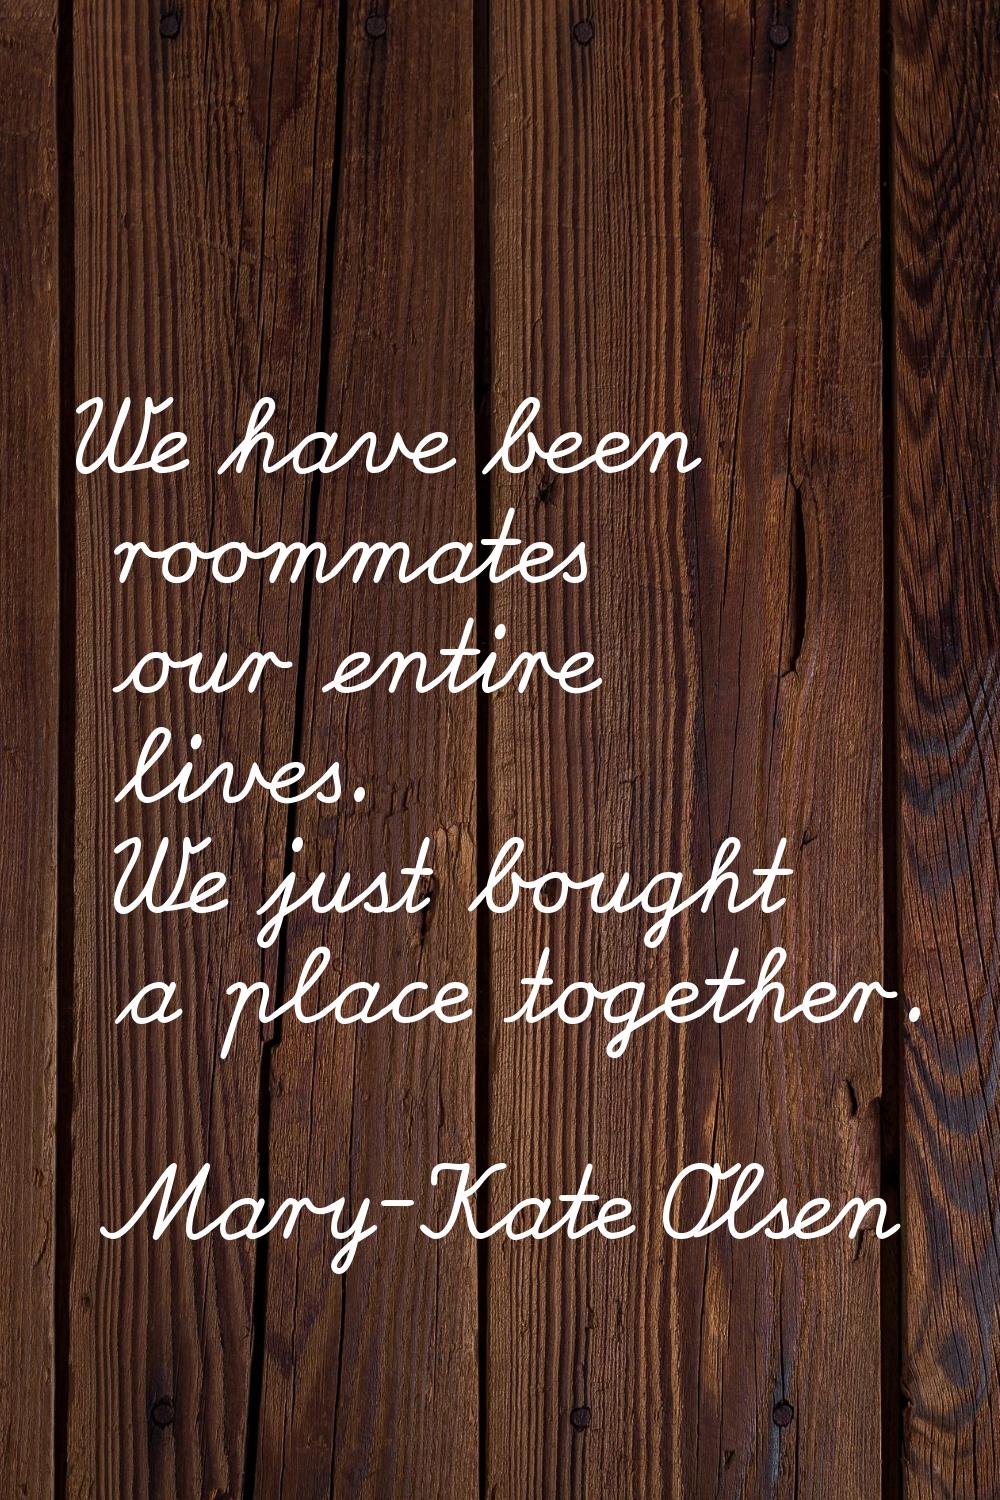 We have been roommates our entire lives. We just bought a place together.